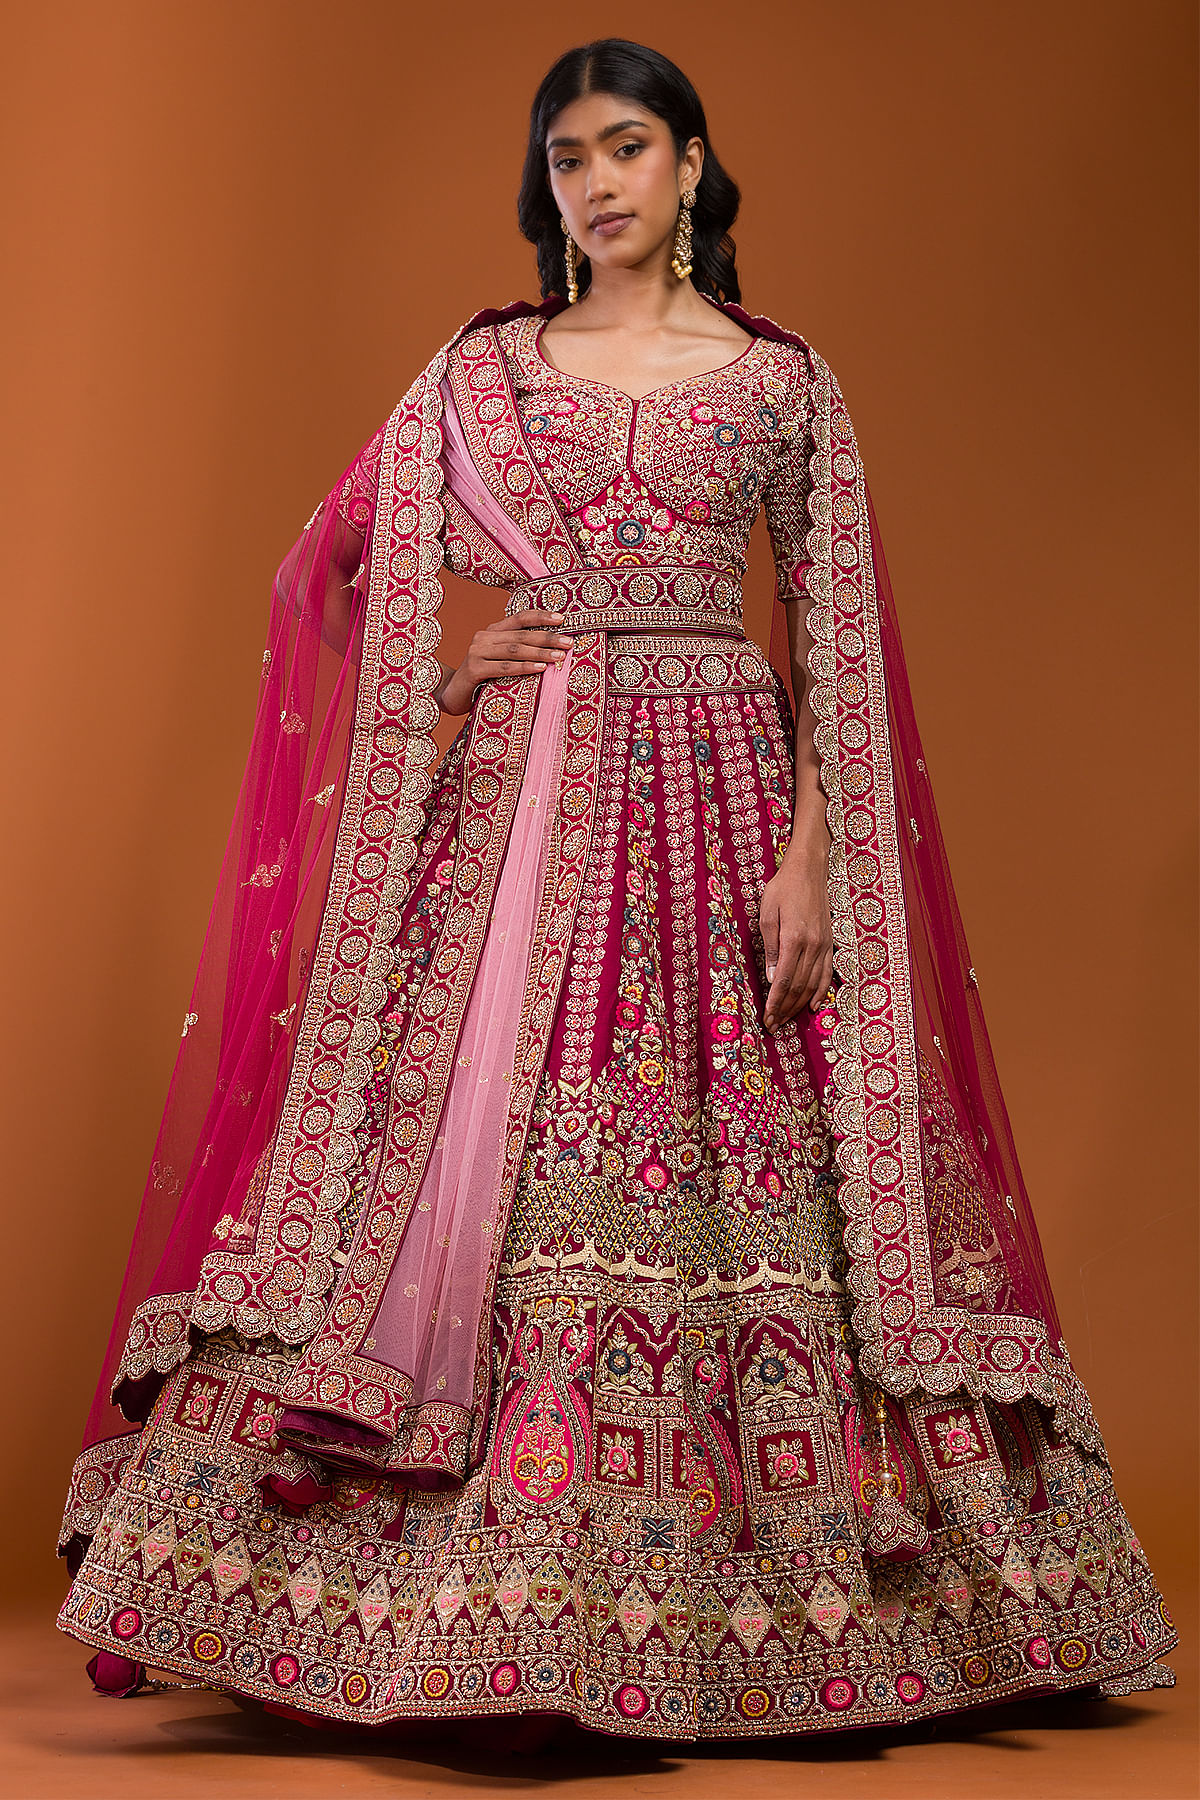 Blue Unstitched Net Lehenga features an intricate thread & stone  embroidered skirt, simple embroidered top & dupatta